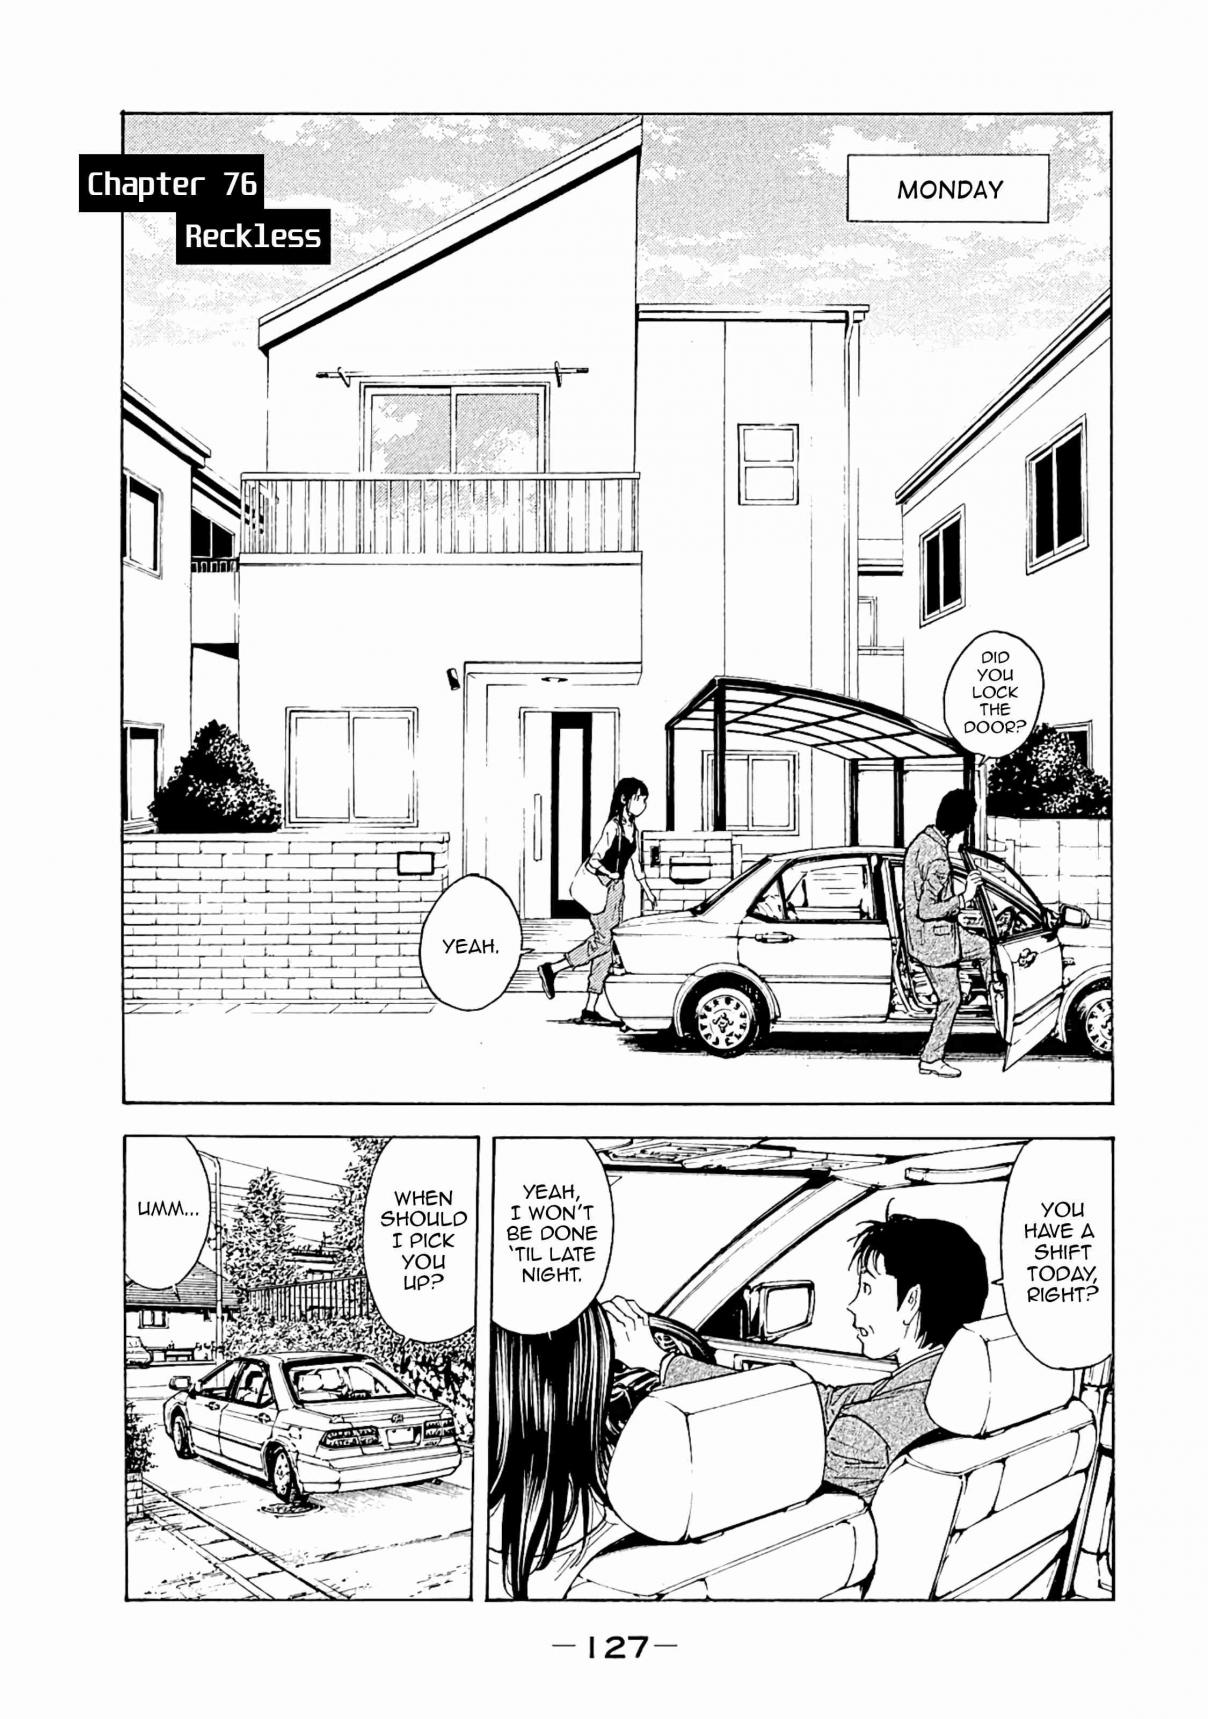 My Home Hero Vol. 9 Ch. 76 Reckless